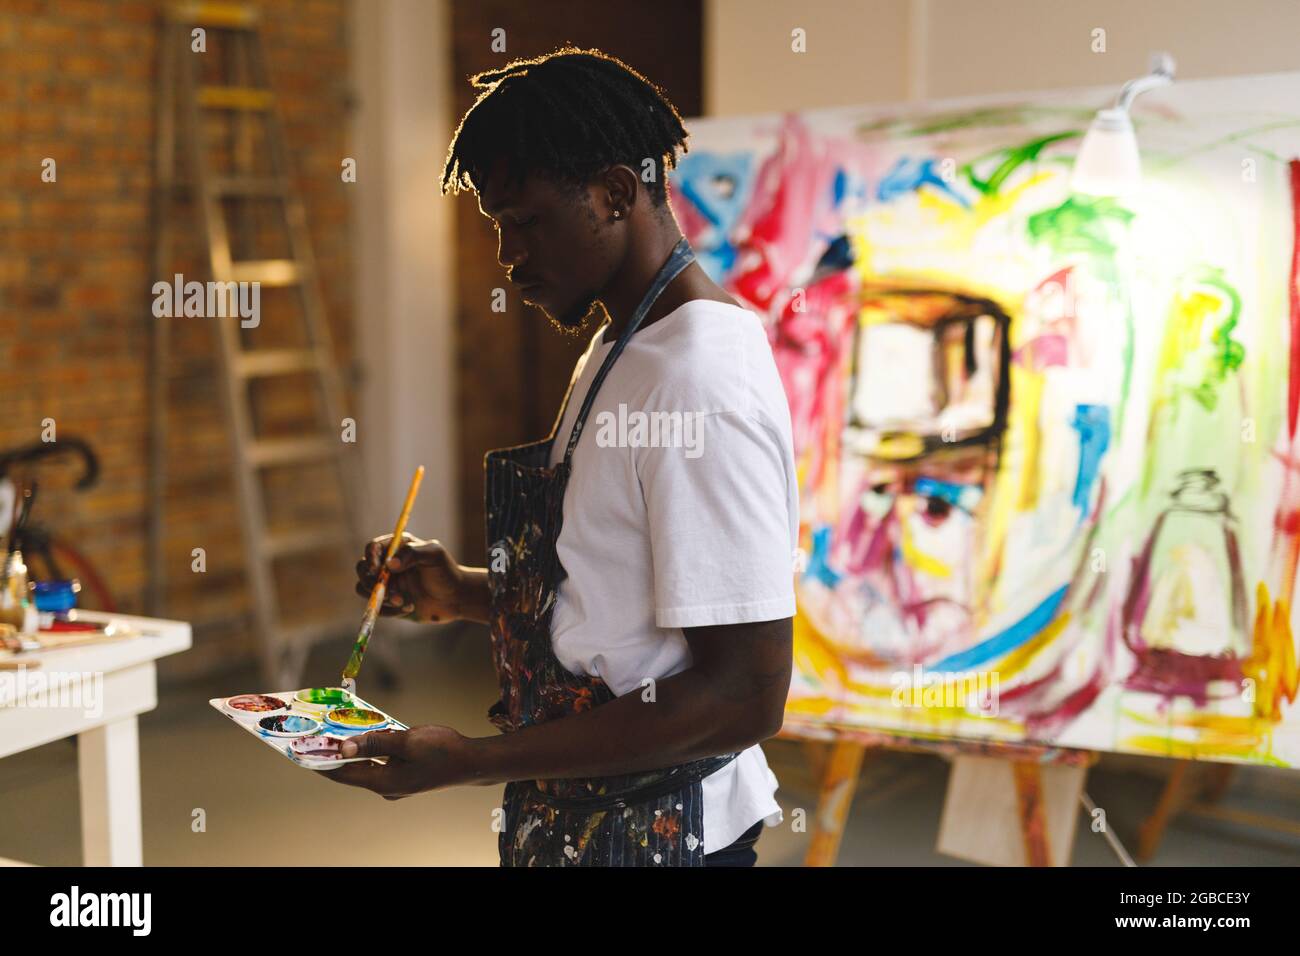 African american male painter at work holding paints and brush in art studio Stock Photo